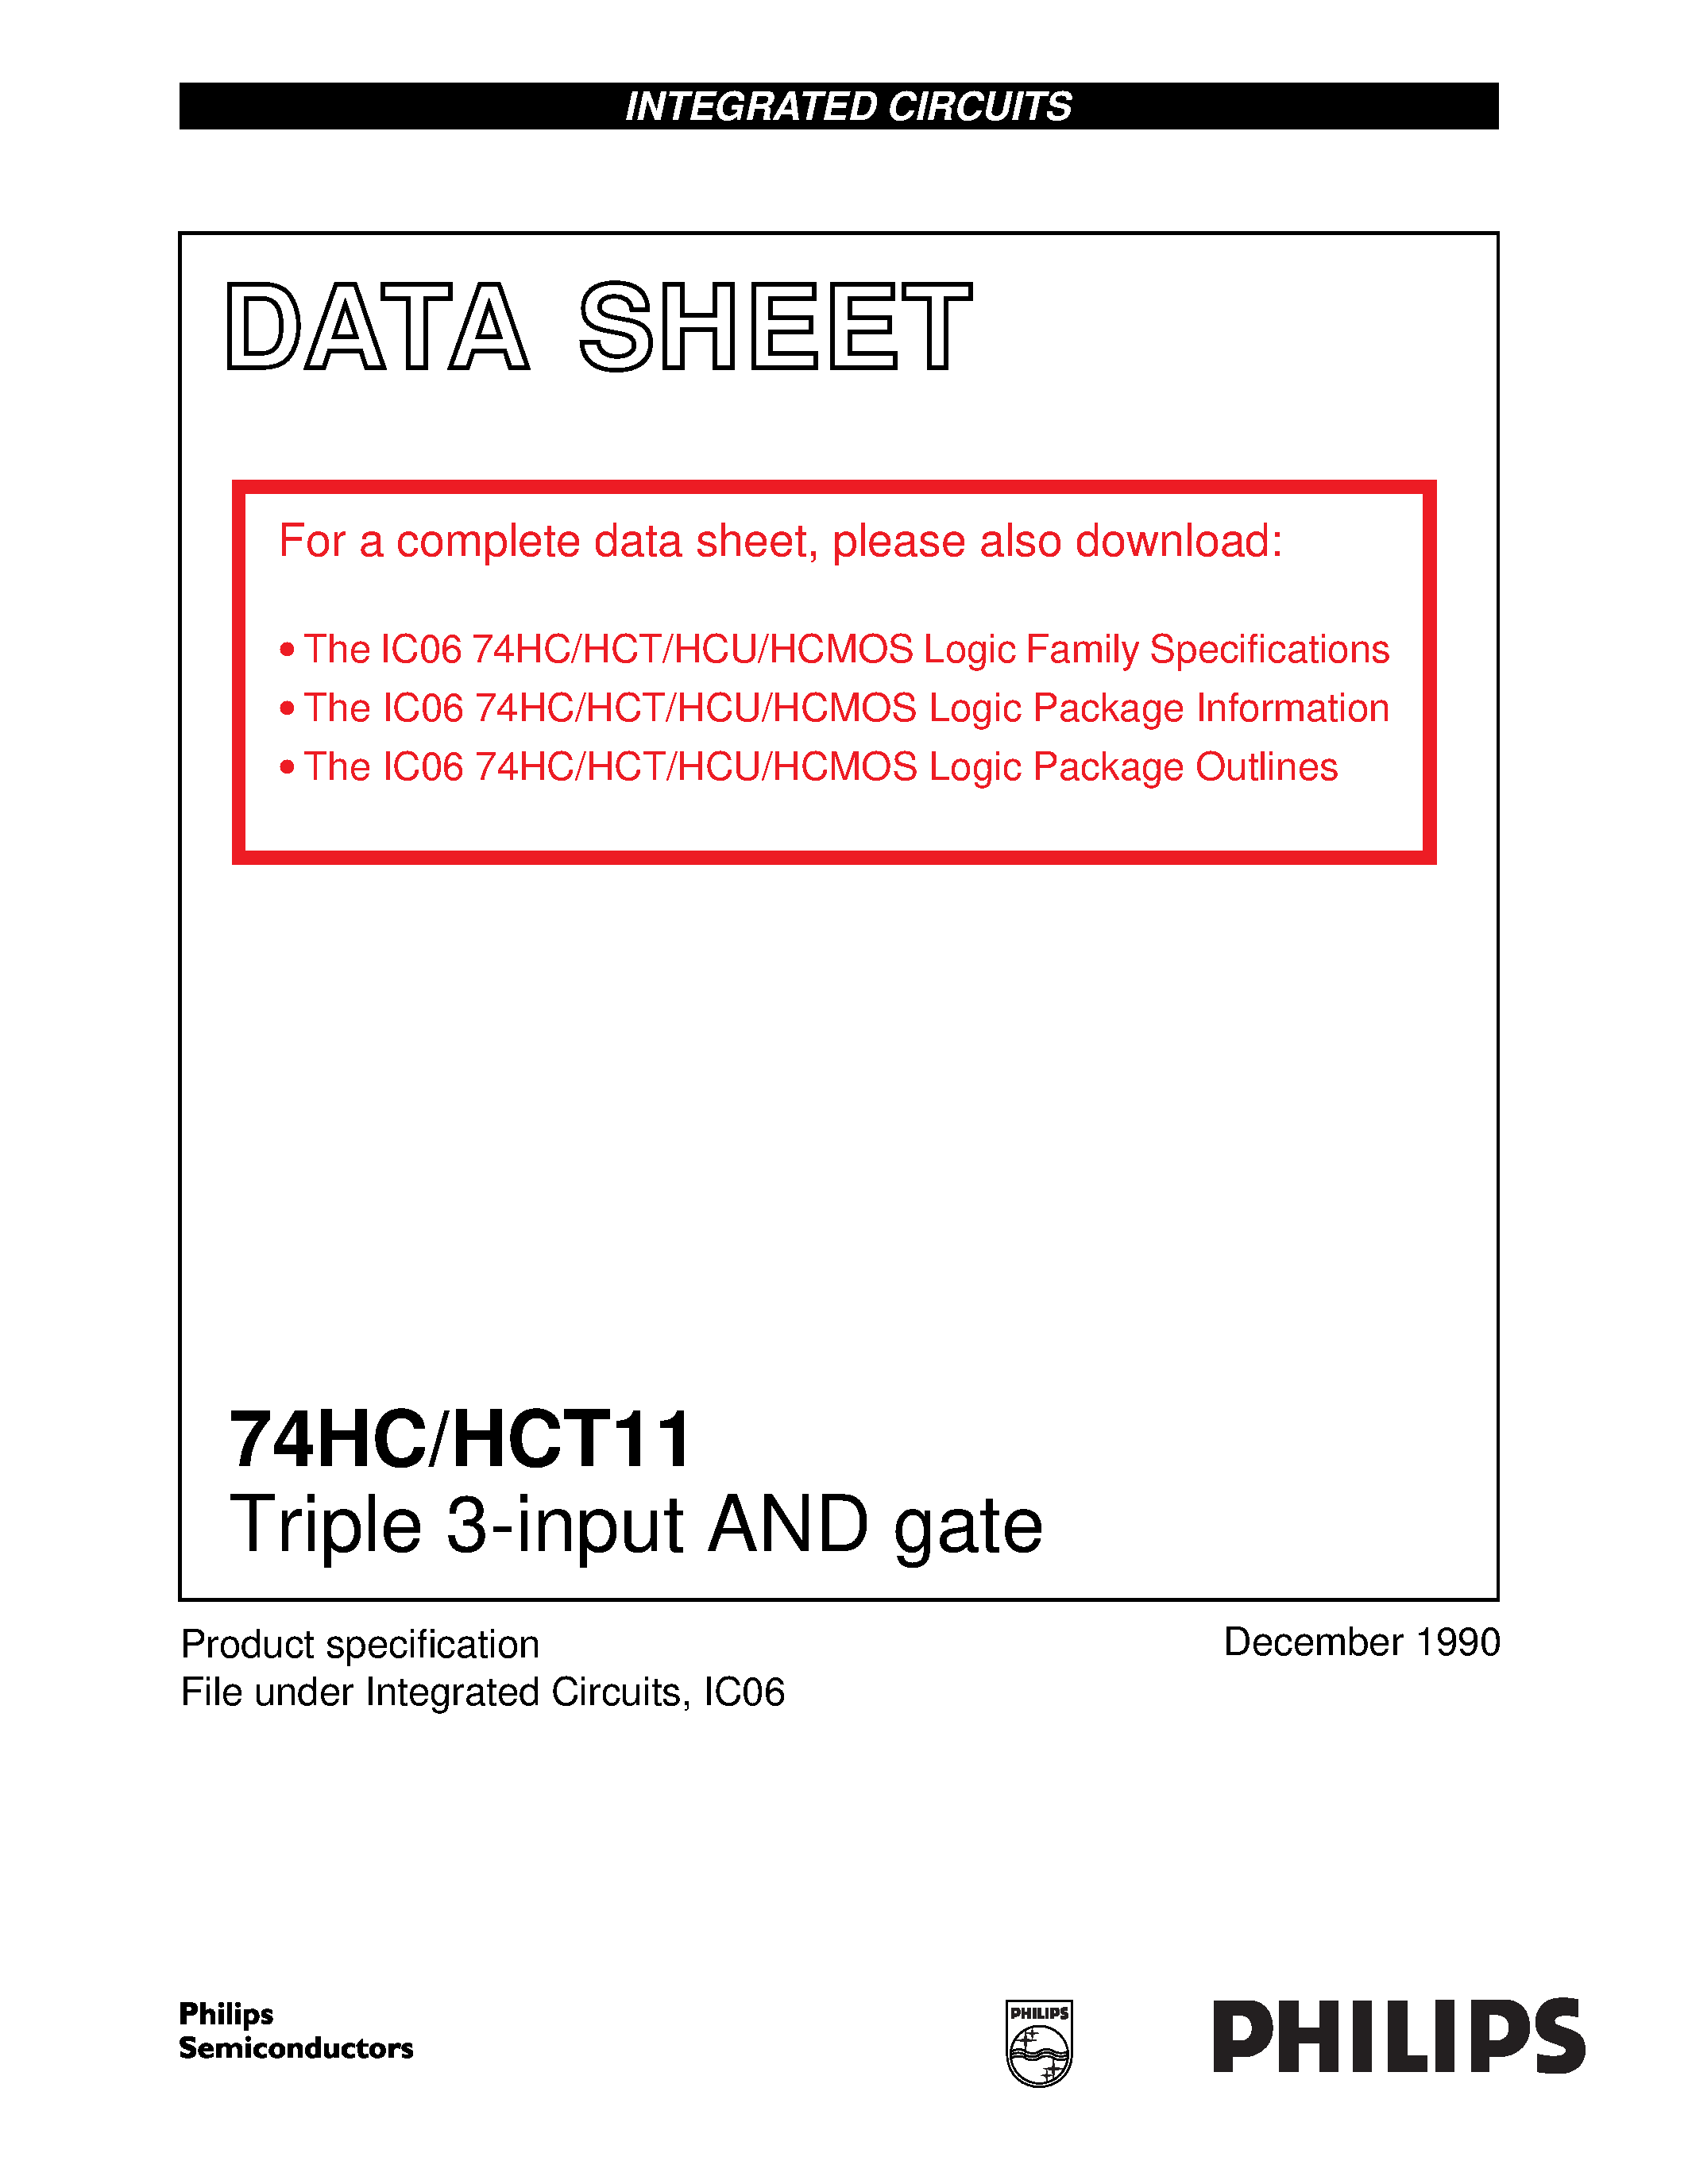 Datasheet 74HCT11 - Triple 3-input AND gate page 1